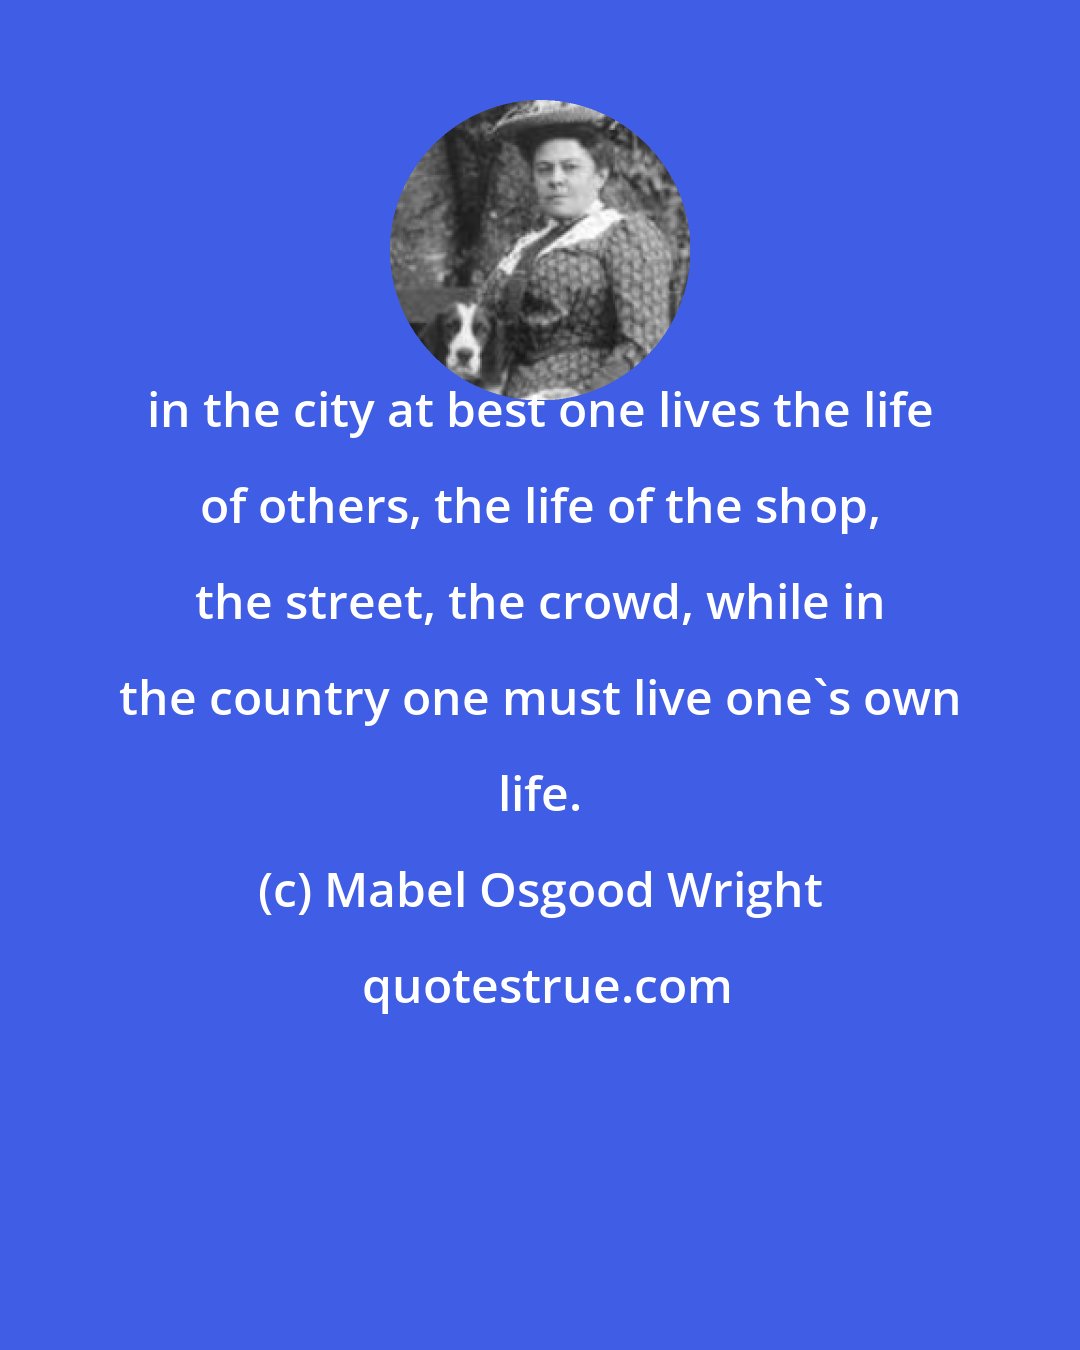 Mabel Osgood Wright: in the city at best one lives the life of others, the life of the shop, the street, the crowd, while in the country one must live one's own life.